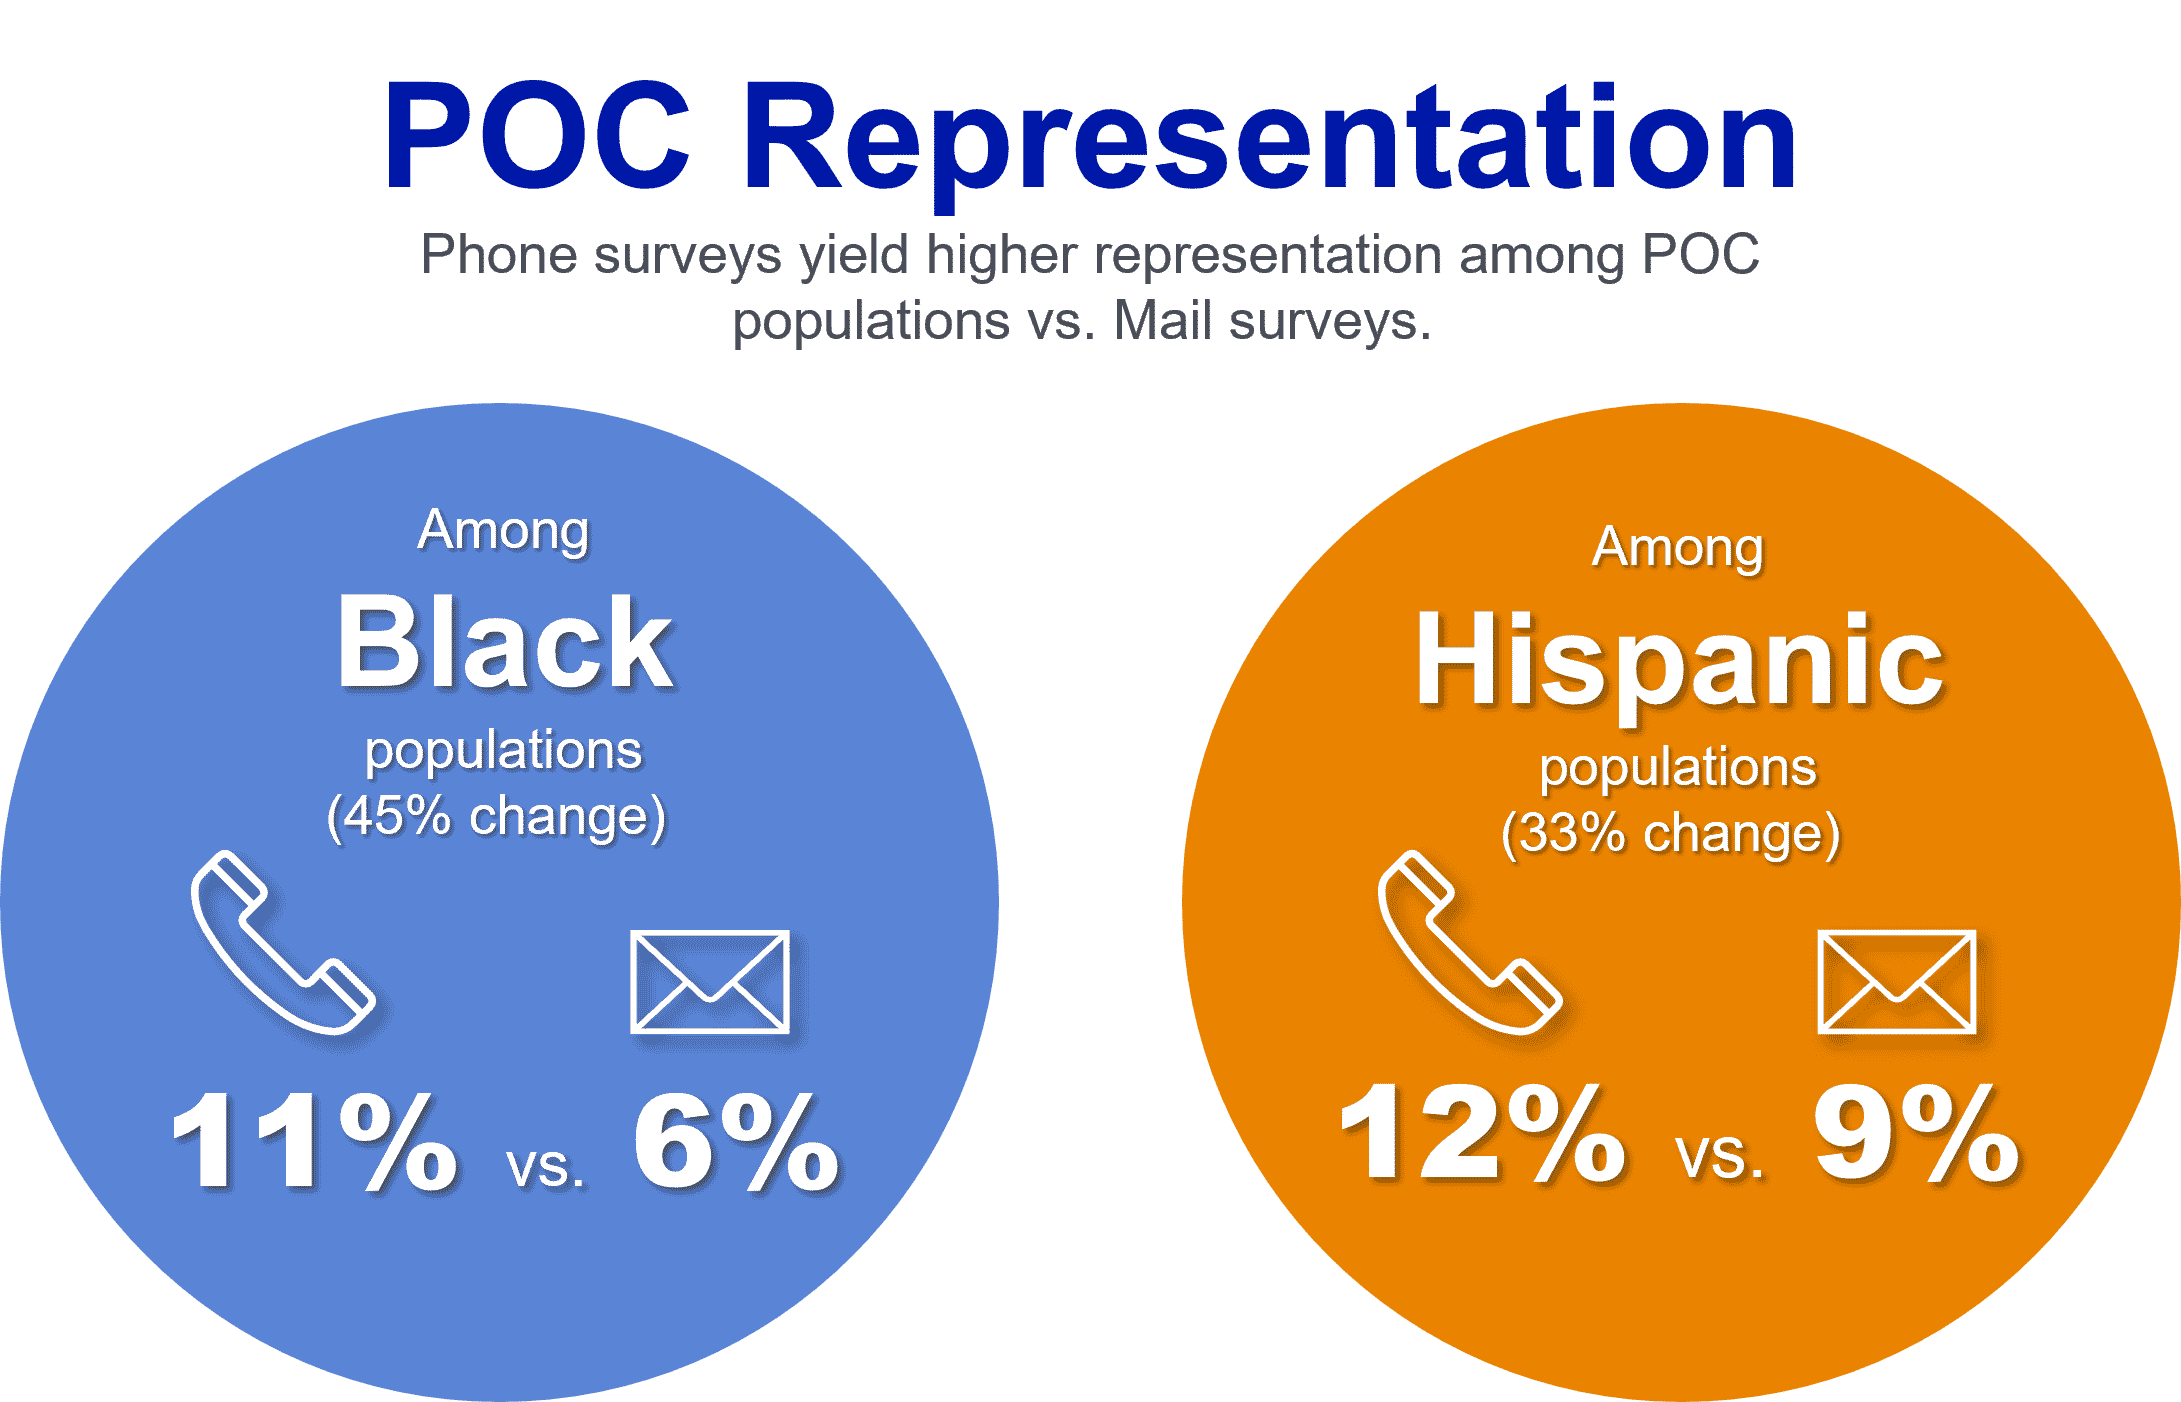 Comparing phone and mail survey modes by POC representation